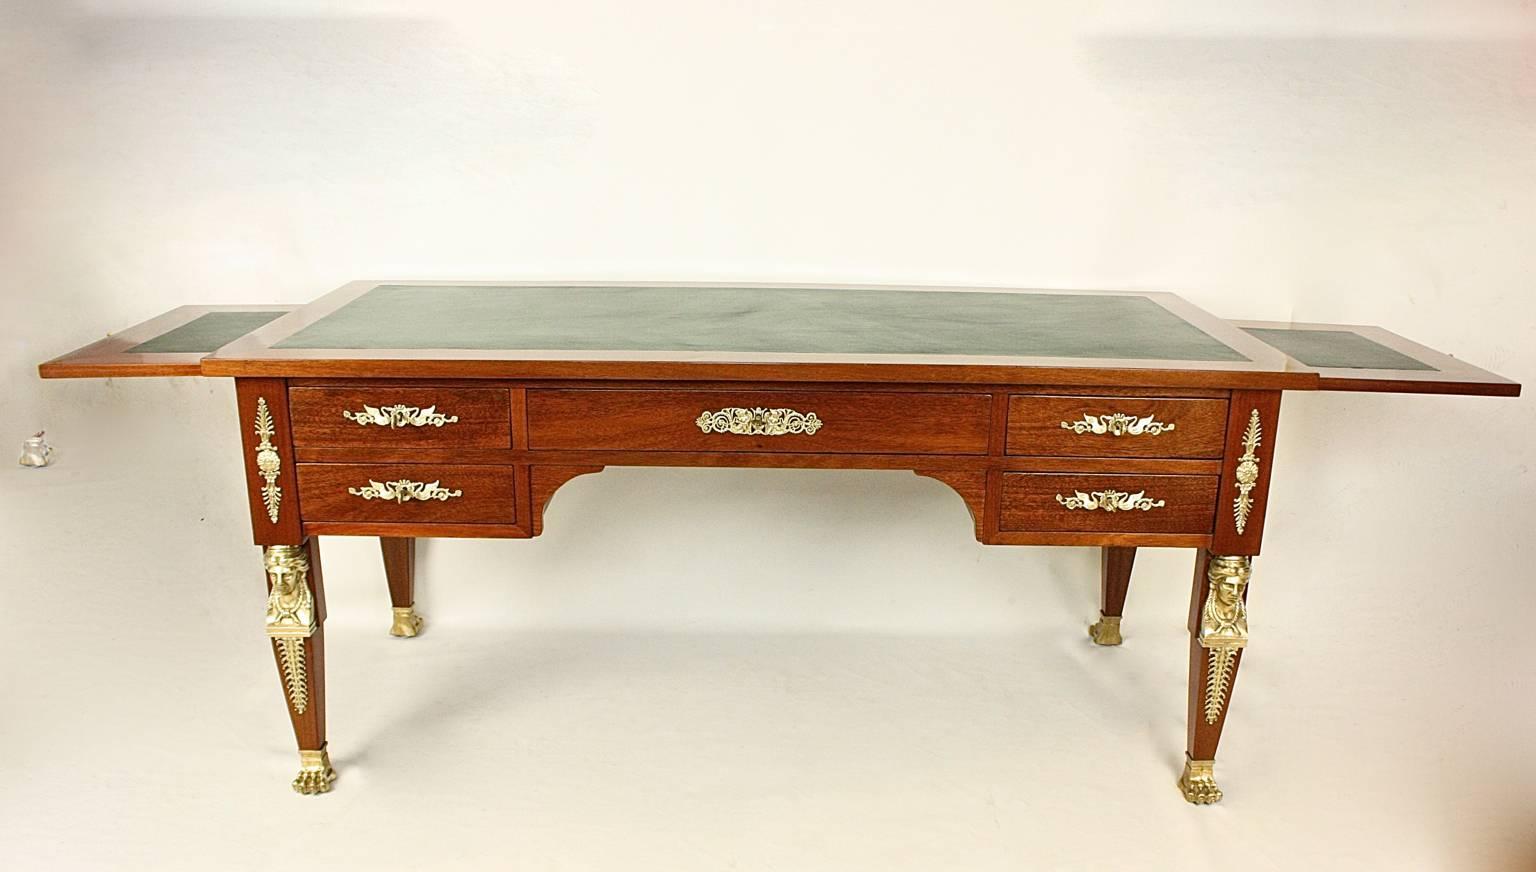 A large Empire gilt bronze-mounted writing table or bureau plat veneered in mahogany on a carcase of oak, the top inset with a green leather writing surface above a central long drawer flanked to each side by two short drawers. On the back of the